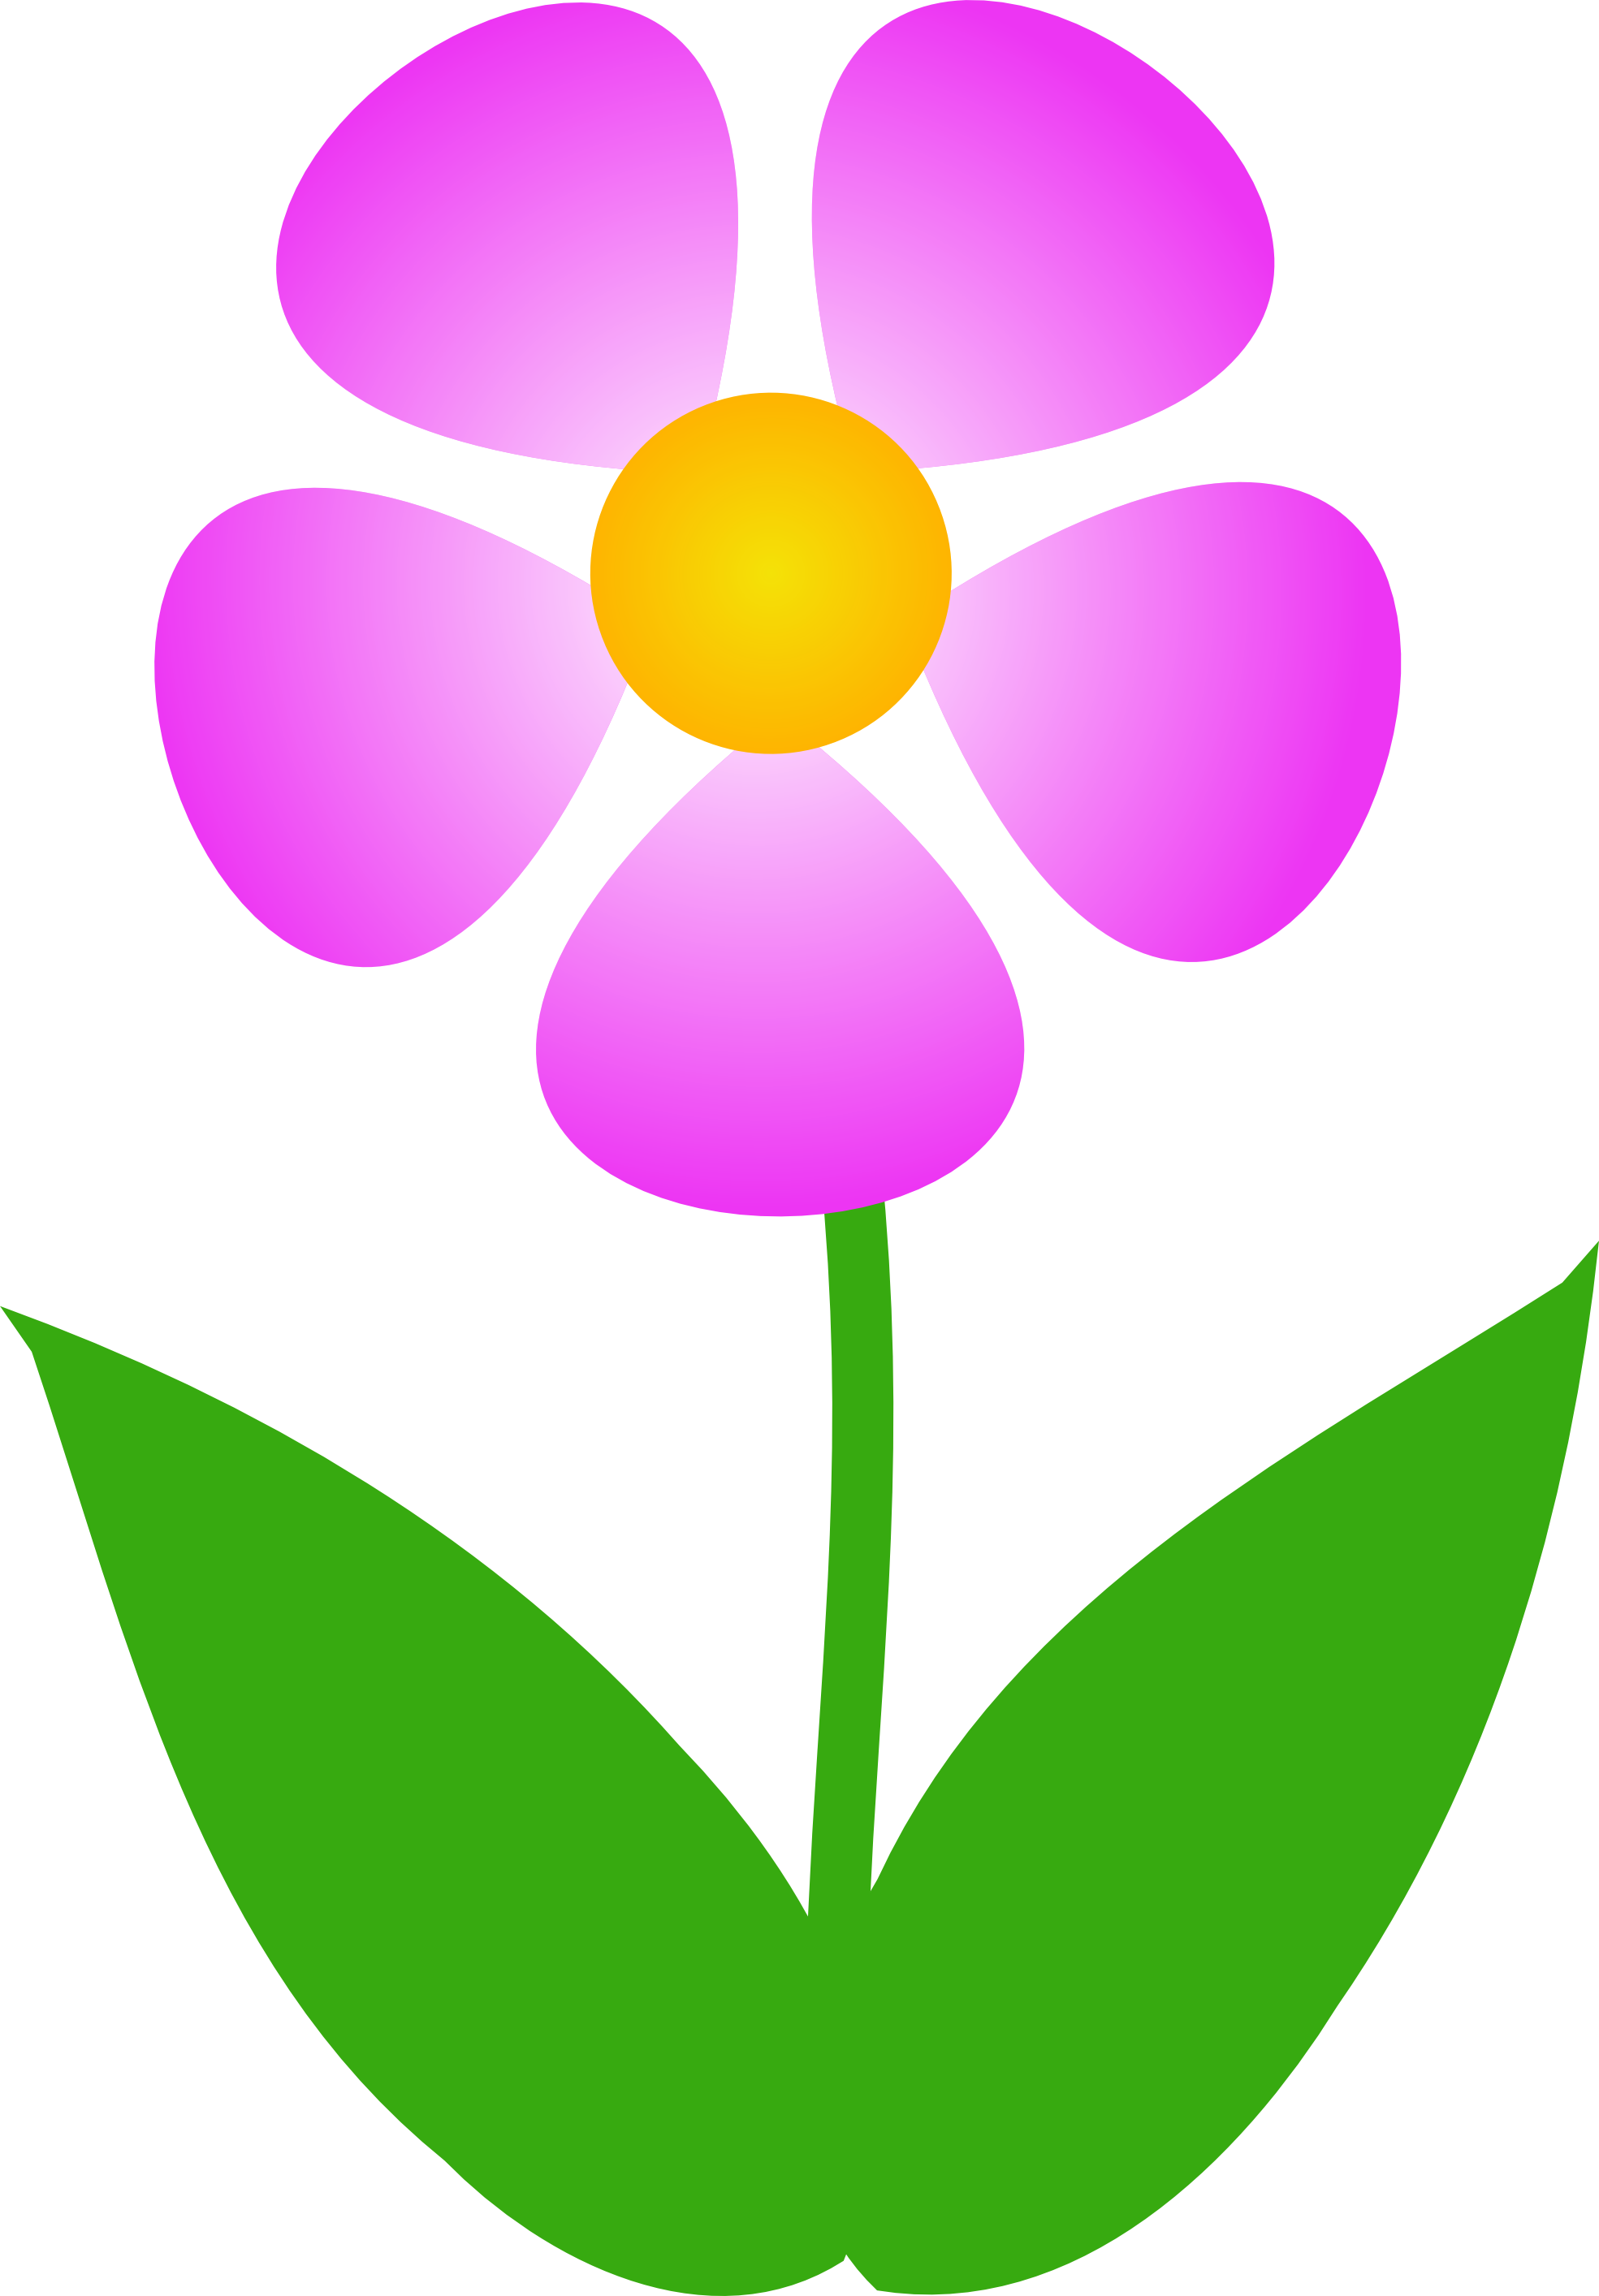 Free Images Of Flowers Flower Pictures Image Clipart